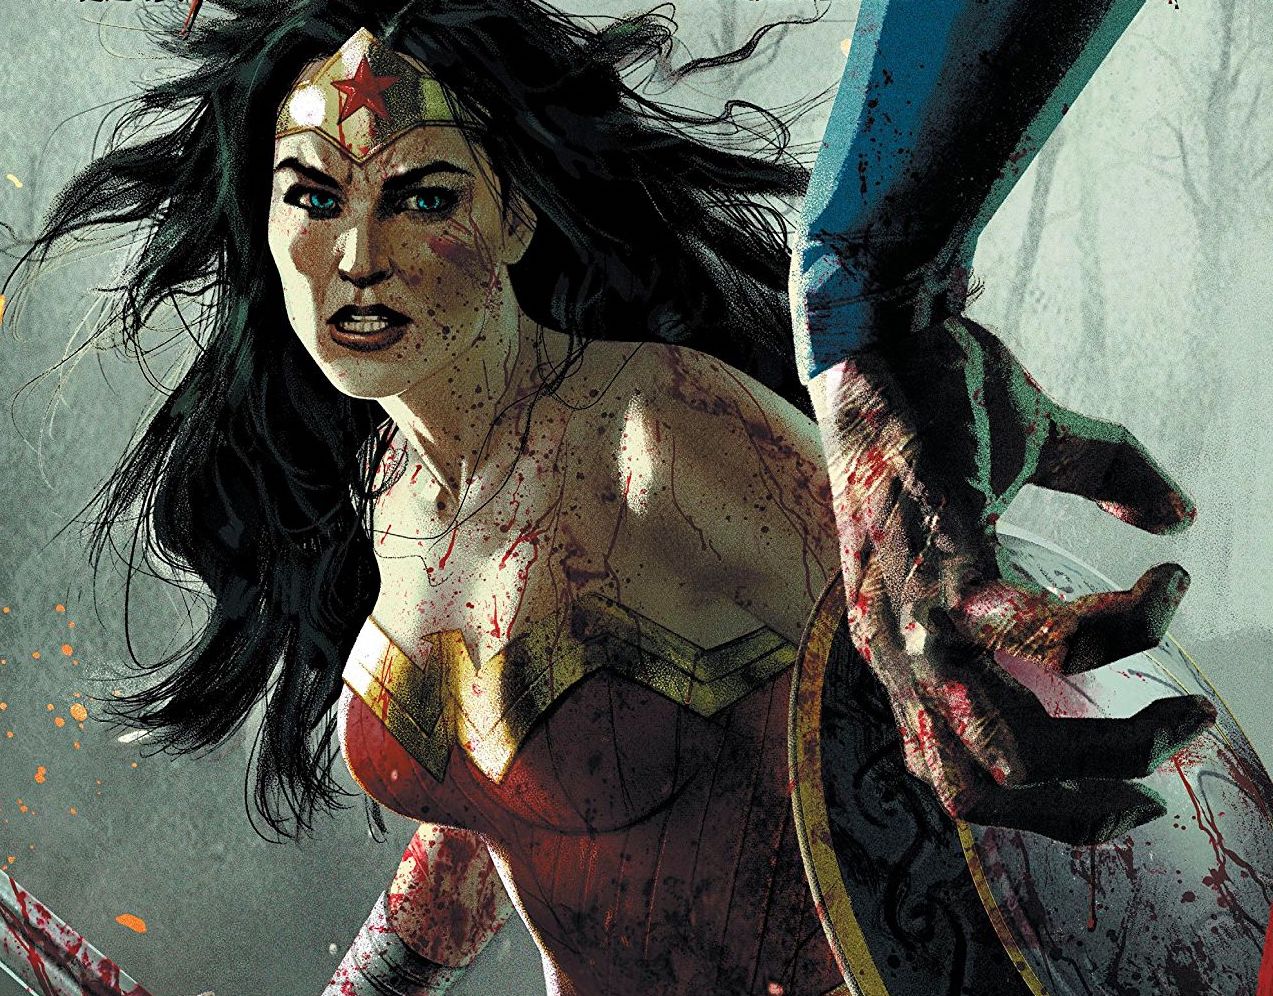 DCeased #5 review: the end is near